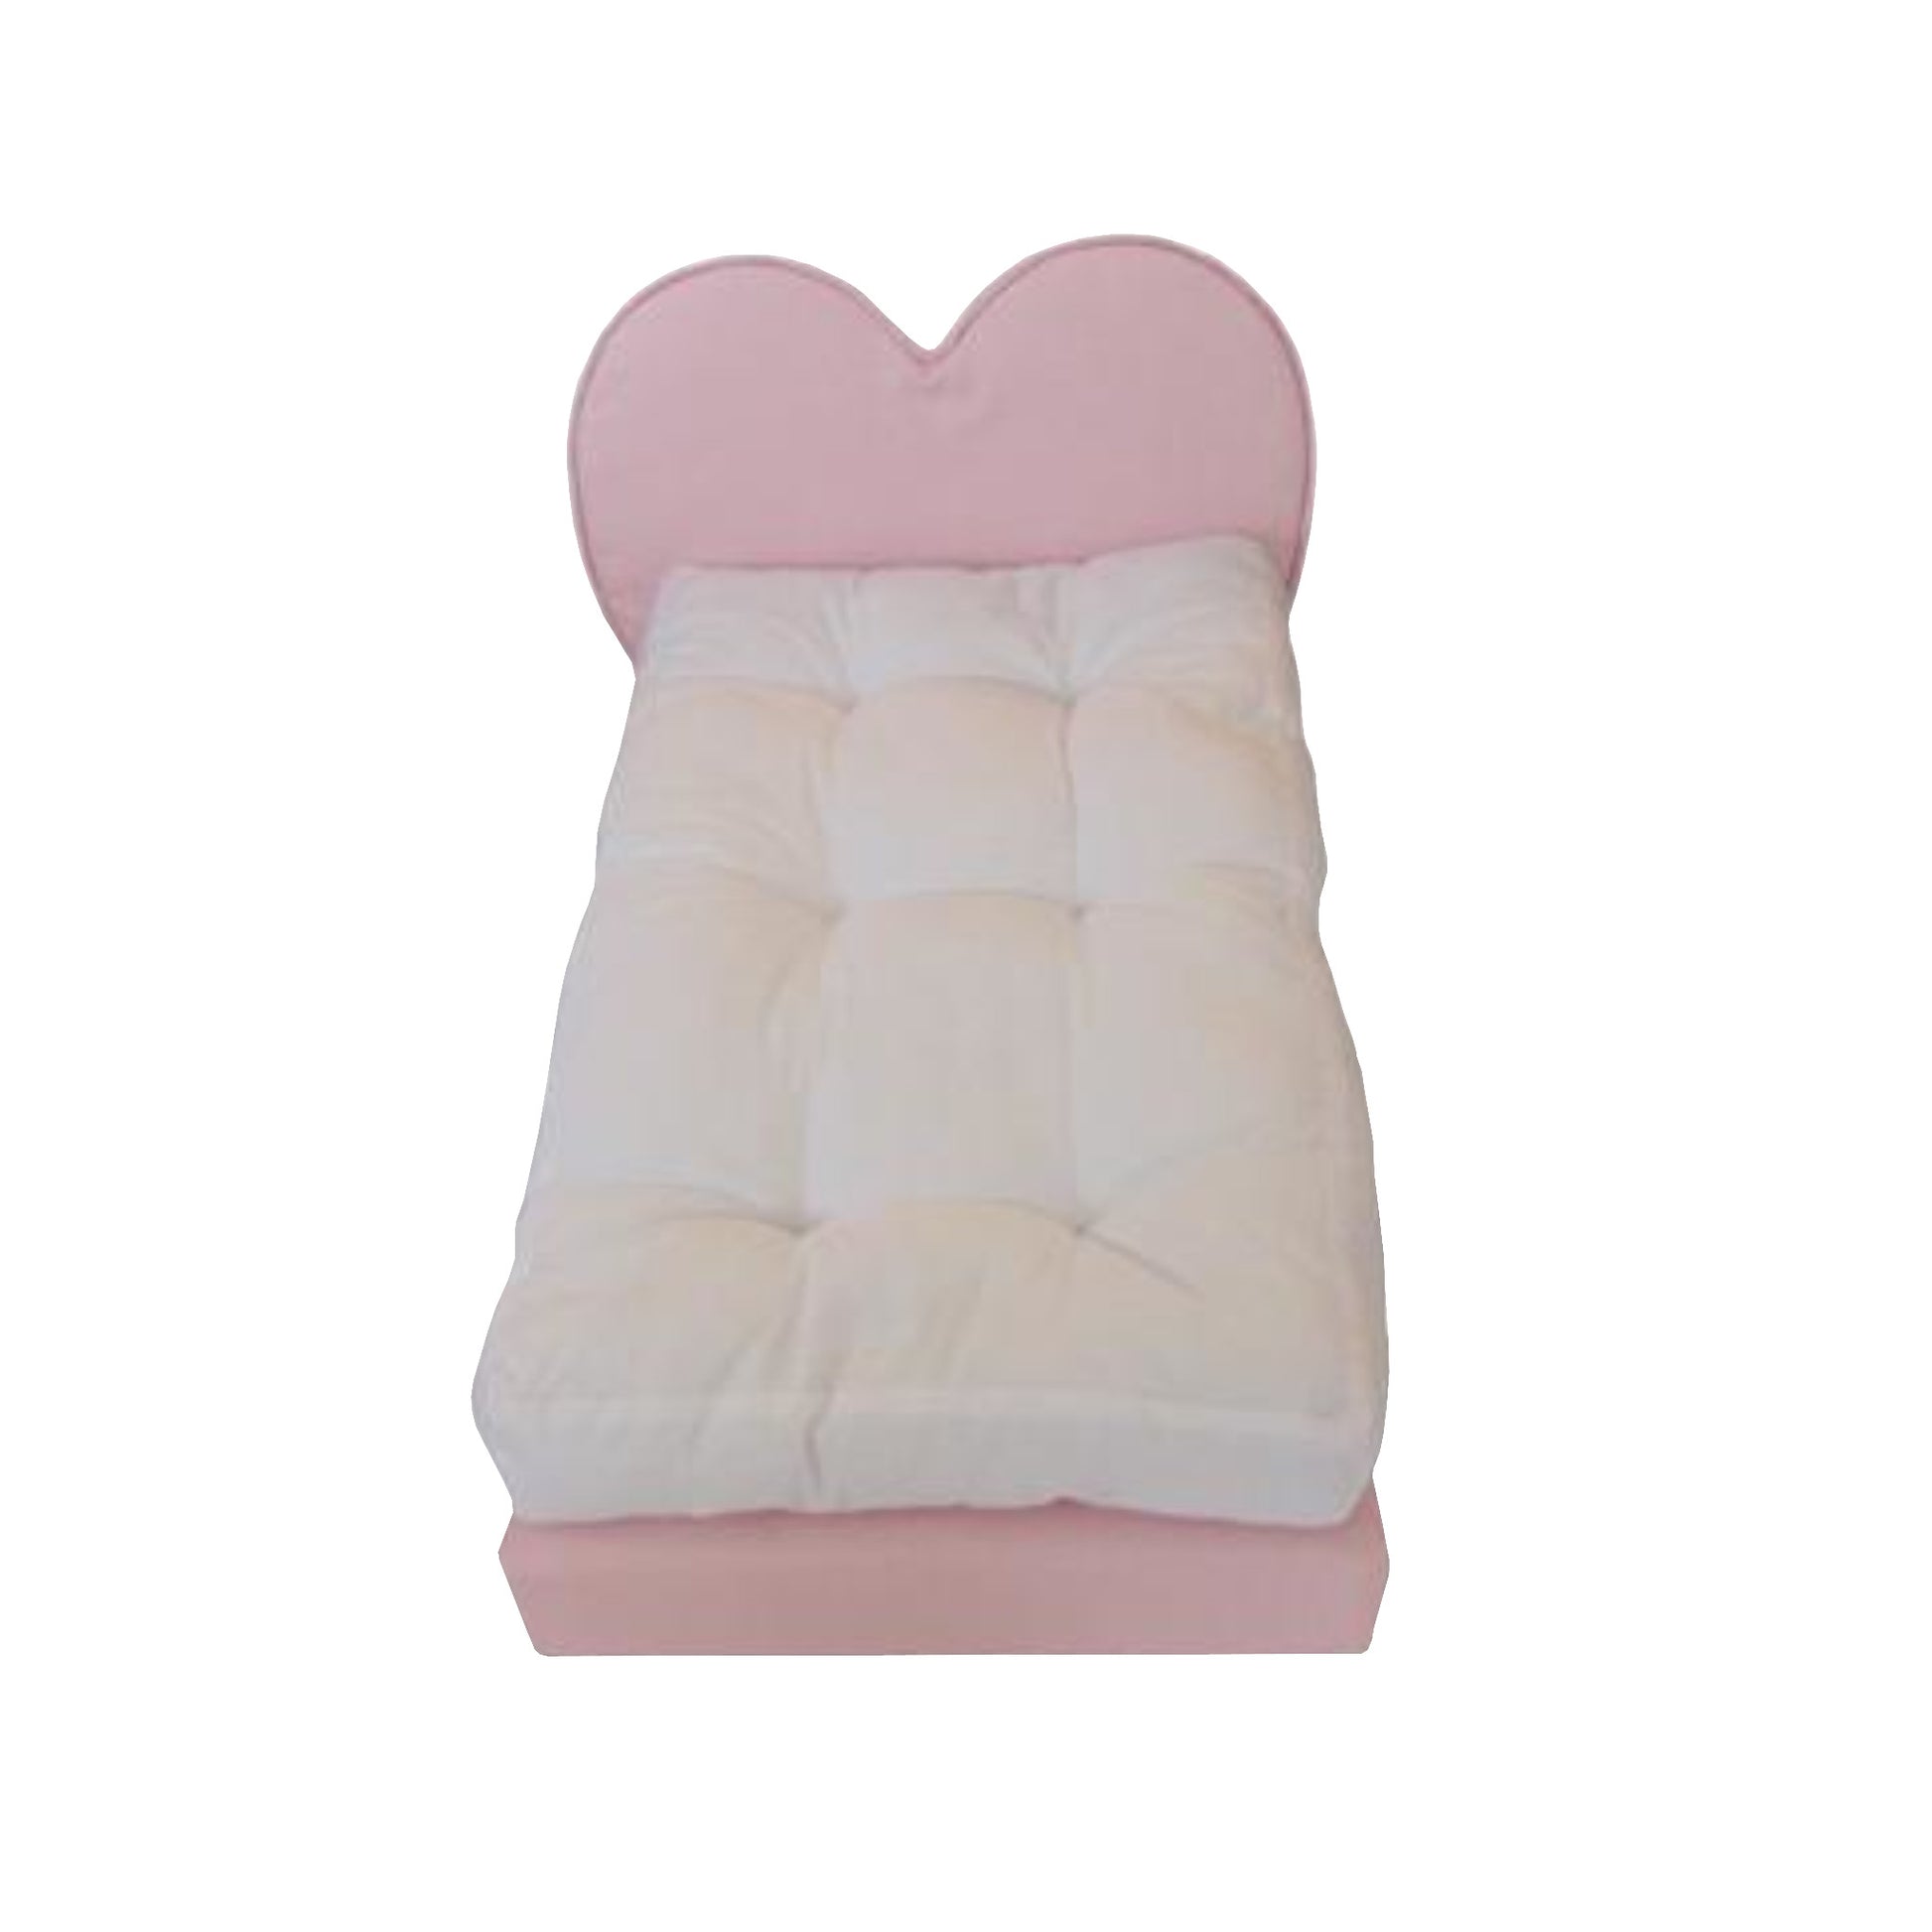 Upholstered Pink Heart Doll Bed for 18-inch dolls without pillows